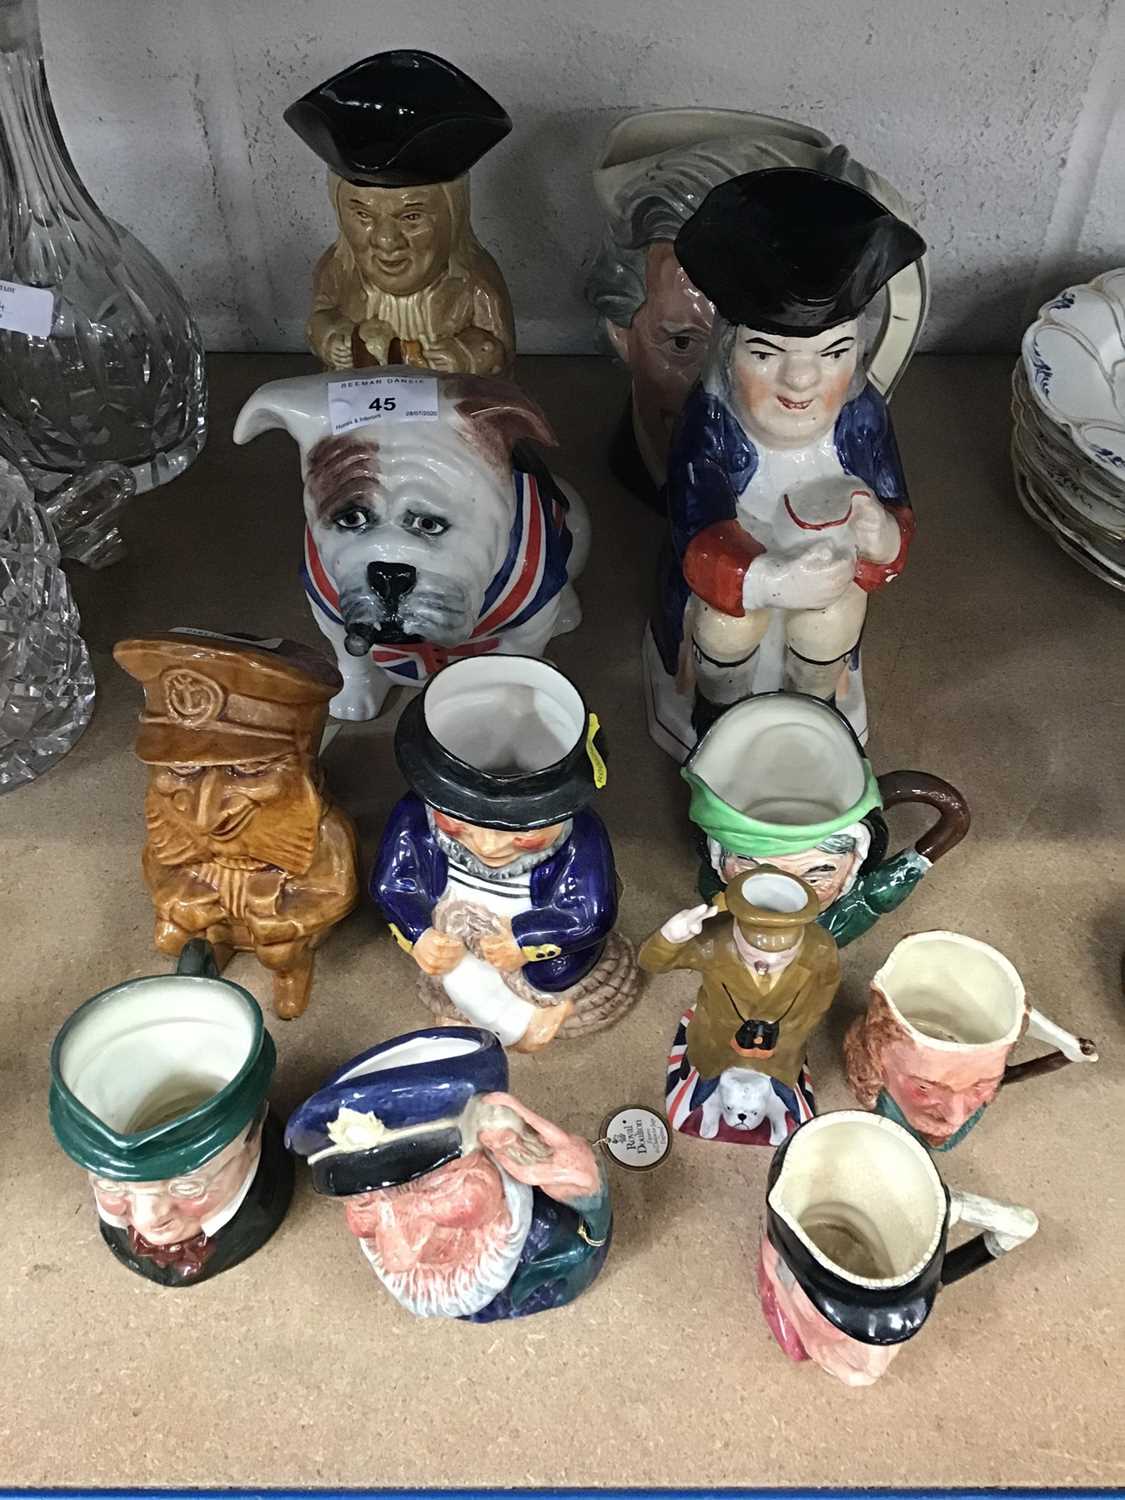 Lot 45 - Group of various Toby jugs and character jugs including Royal Doulton